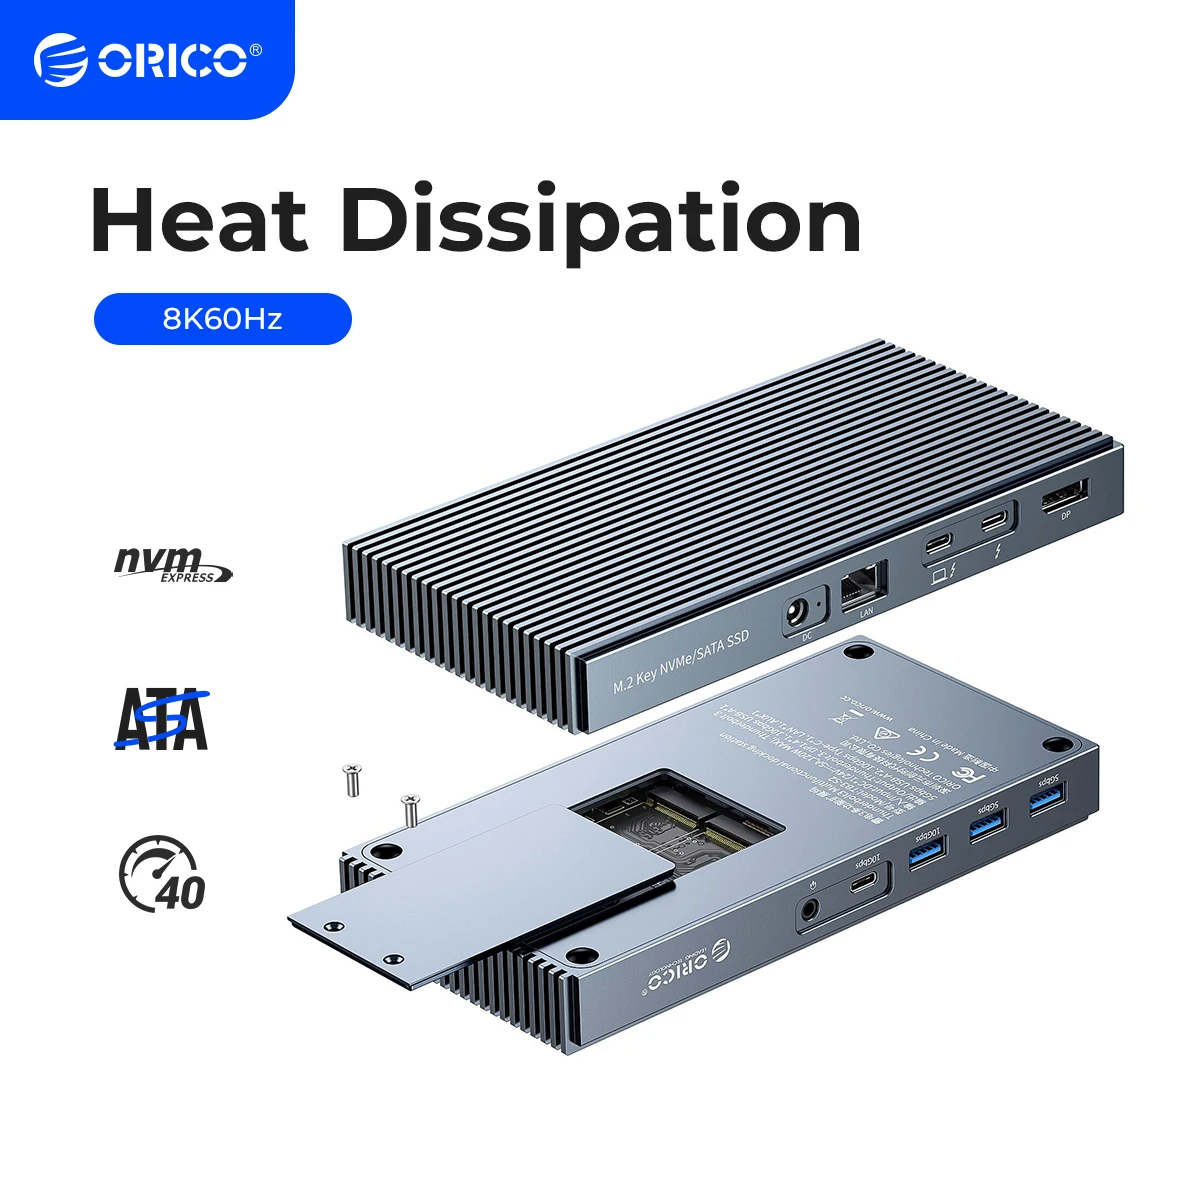 ORICO M.2 NVMe NGFF SSD Case with Thunderbolt 3 Dock Station